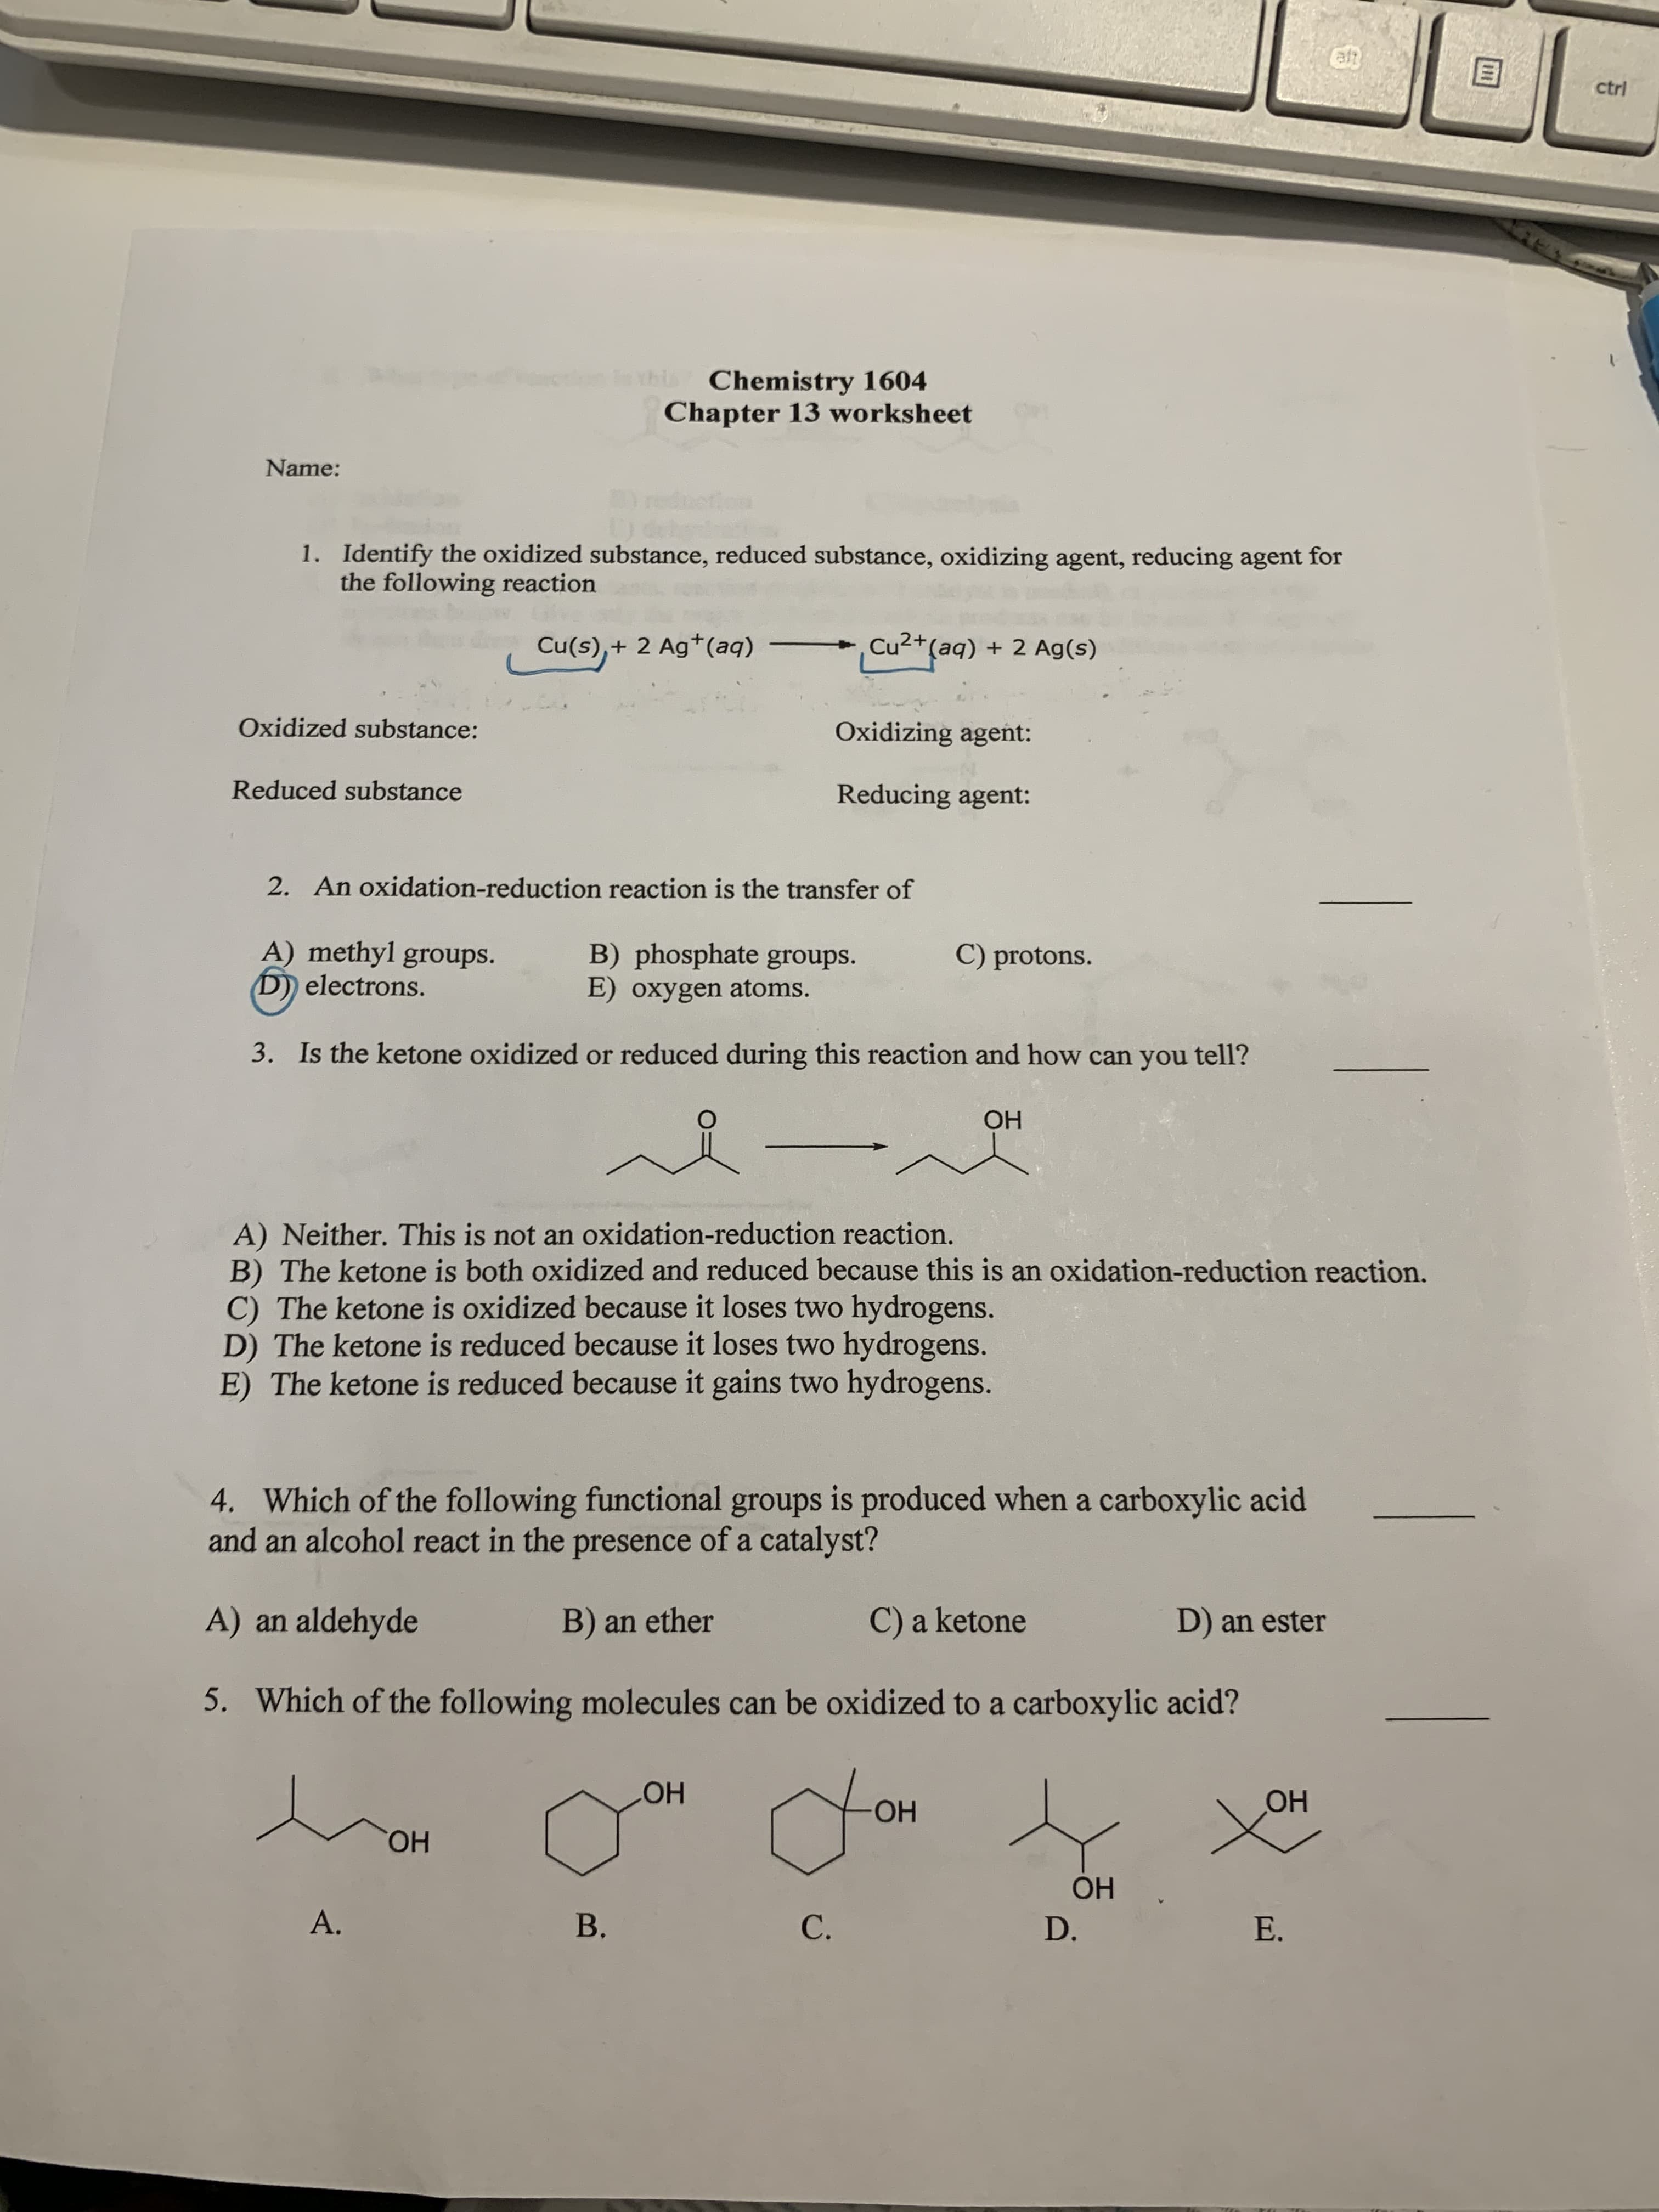 Name:
1. Identify the oxidized substance, reduced substance, oxidizing agent, reducing agent for
the following reaction
Cu(s),+ 2 Ag*(aq)
Cu2+(aq) + 2 Ag(s)
Oxidized substance:
Oxidizing agent:
Reduced substance
Reducing agent:
